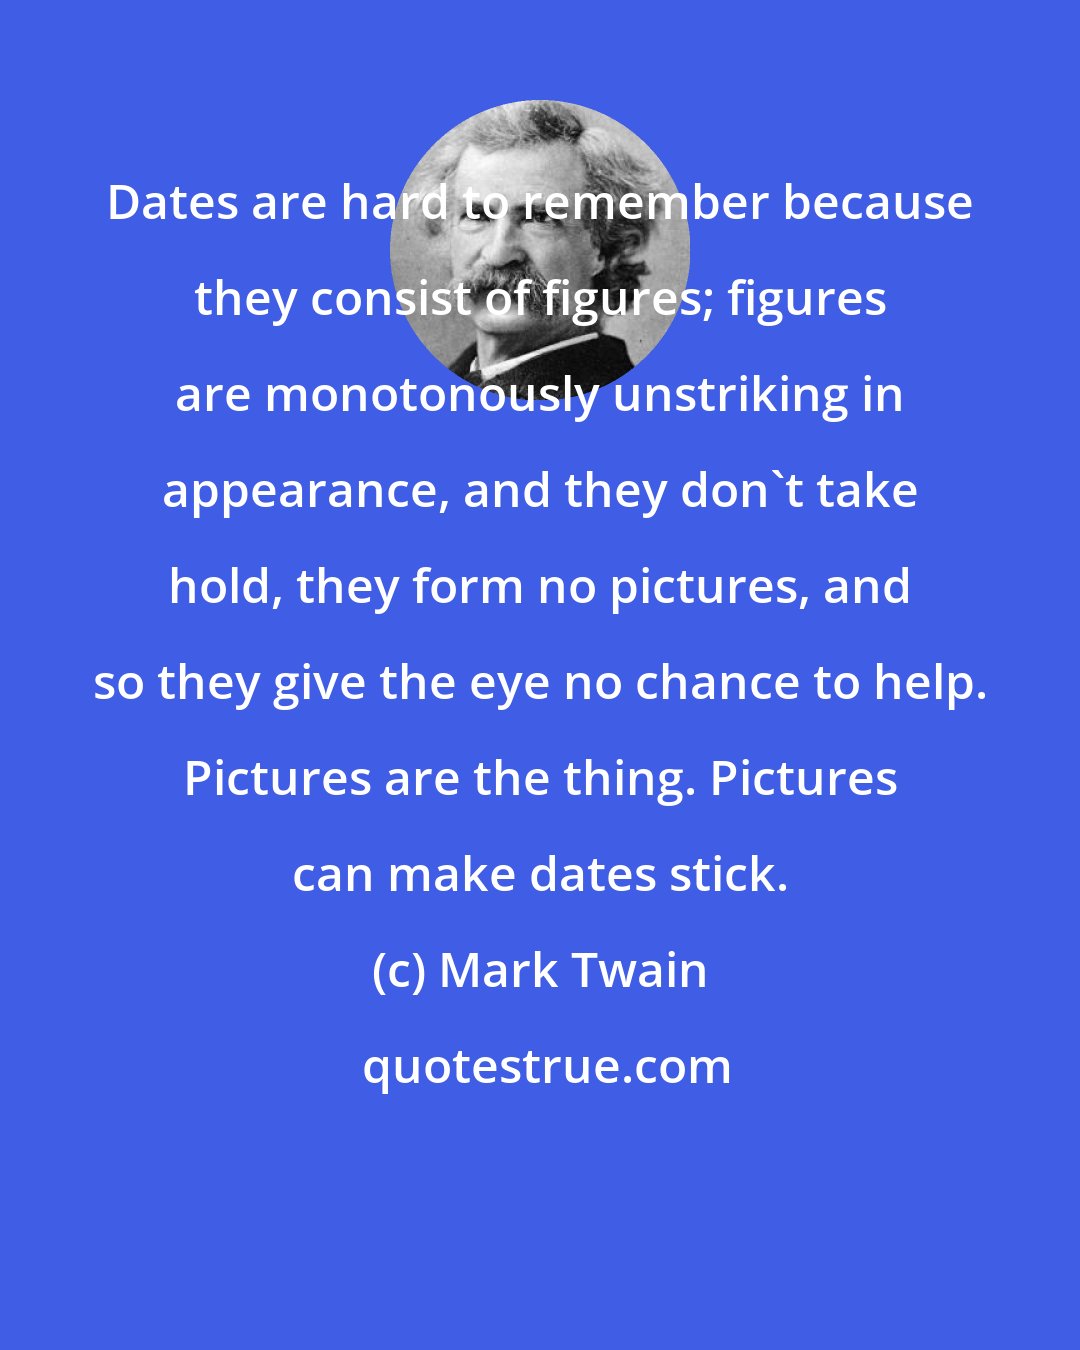 Mark Twain: Dates are hard to remember because they consist of figures; figures are monotonously unstriking in appearance, and they don't take hold, they form no pictures, and so they give the eye no chance to help. Pictures are the thing. Pictures can make dates stick.